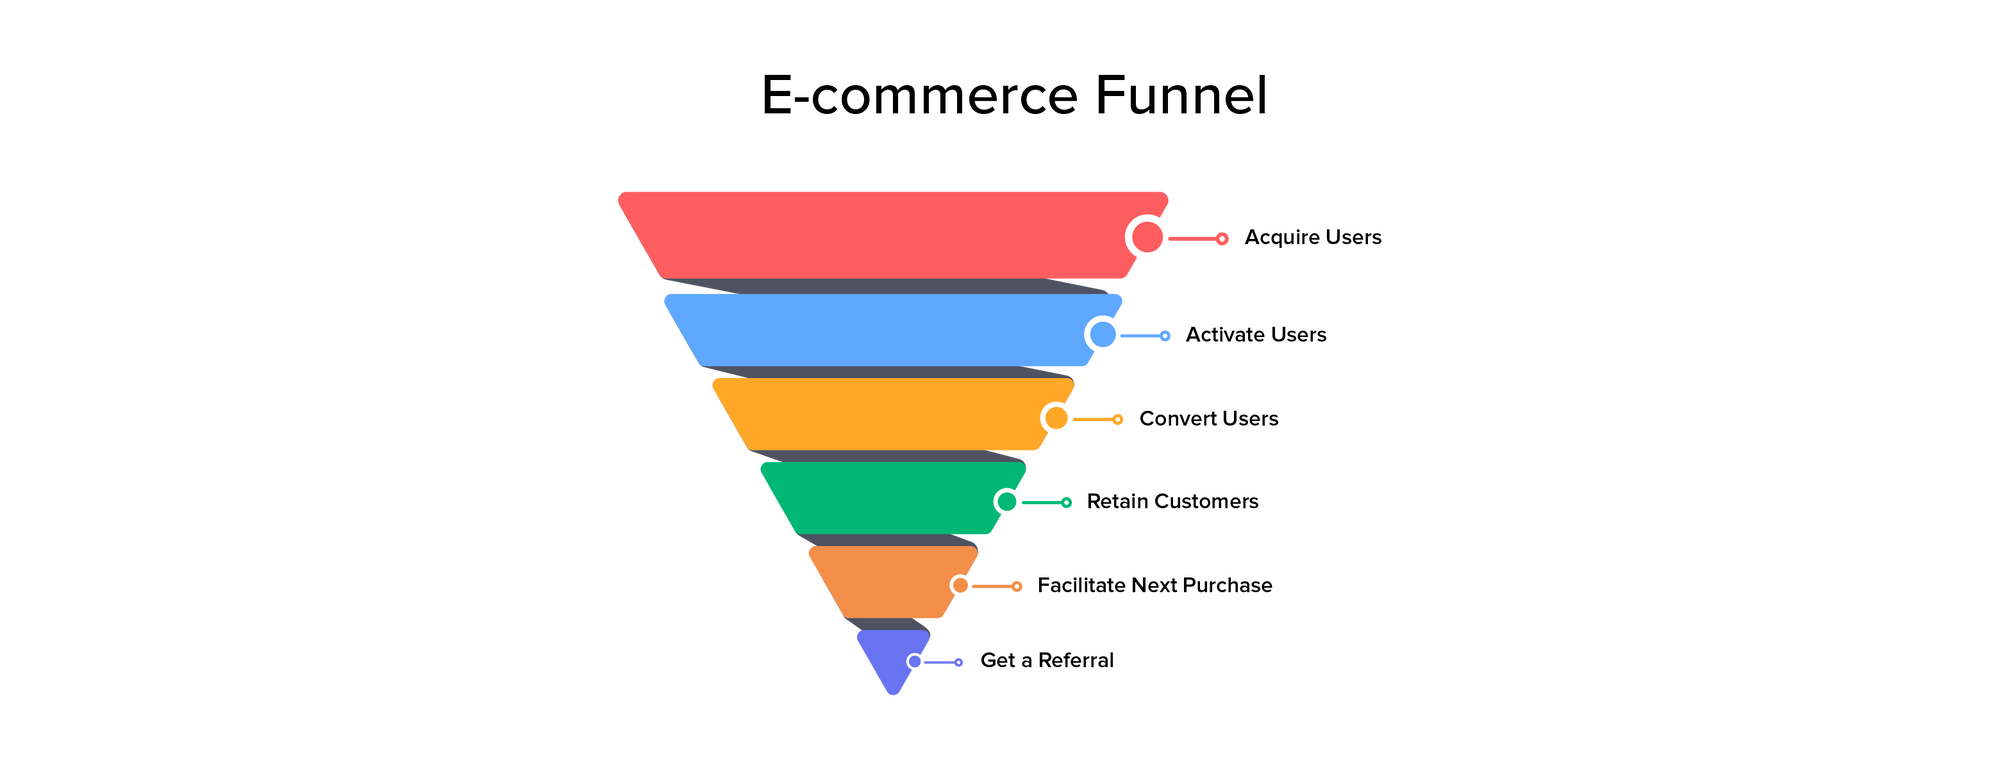 tradition marketing funnel for user acquisition, conversion and retention